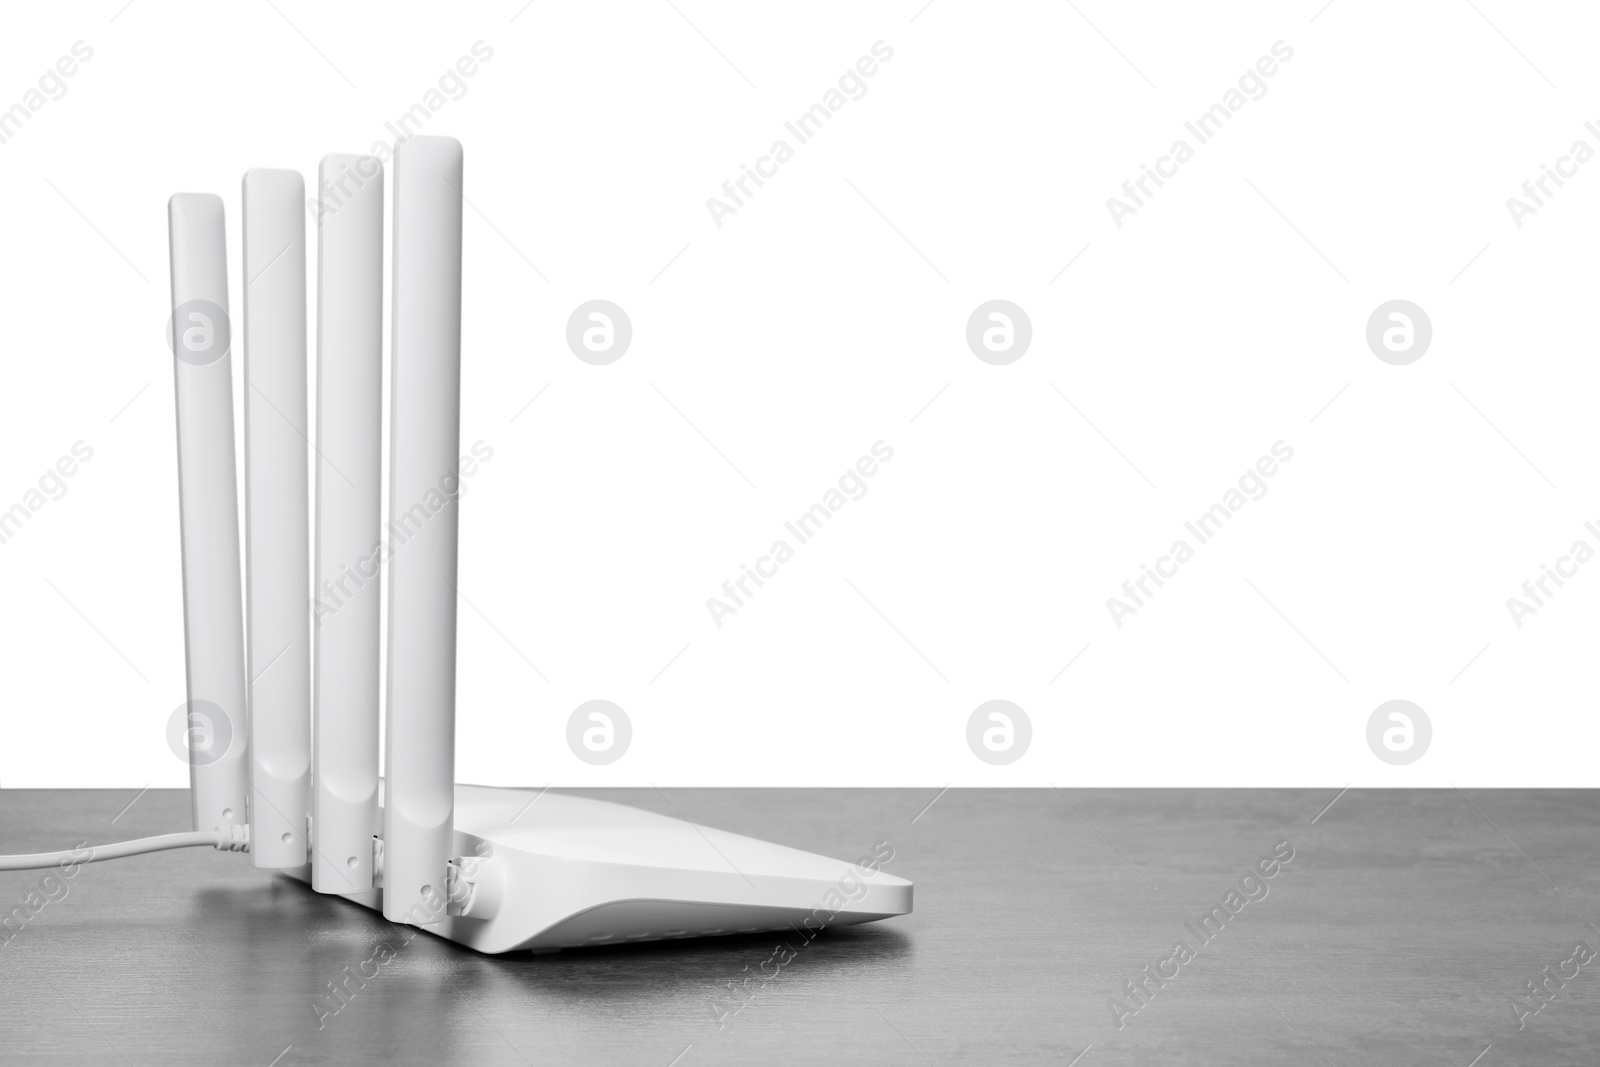 Photo of New modern Wi-Fi router on grey table against white background. Space for text